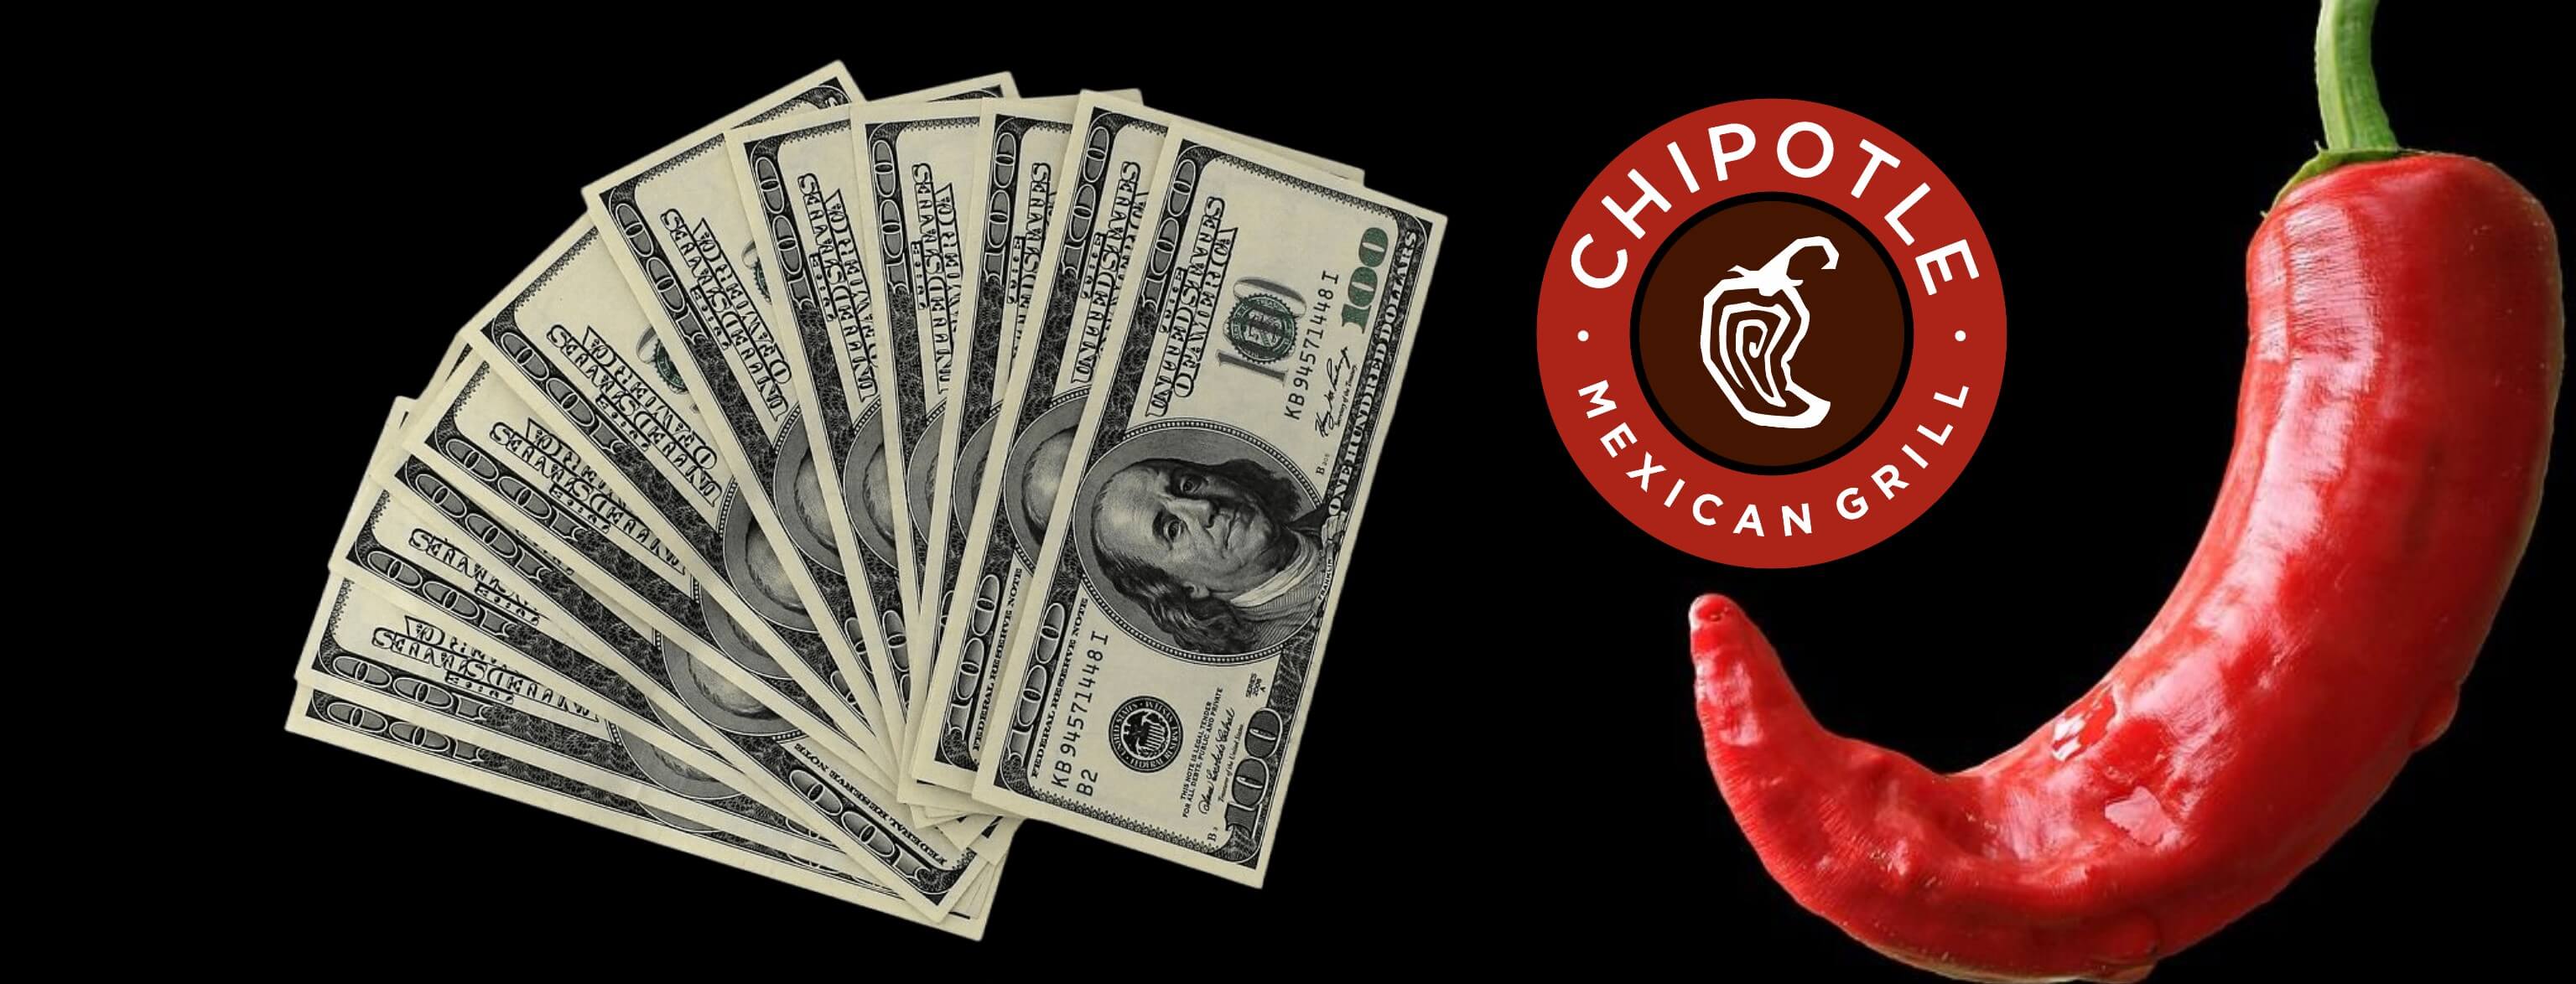 Chipotle Stock NYSE:CMG Q2 Financials Exhibit Solid Growth